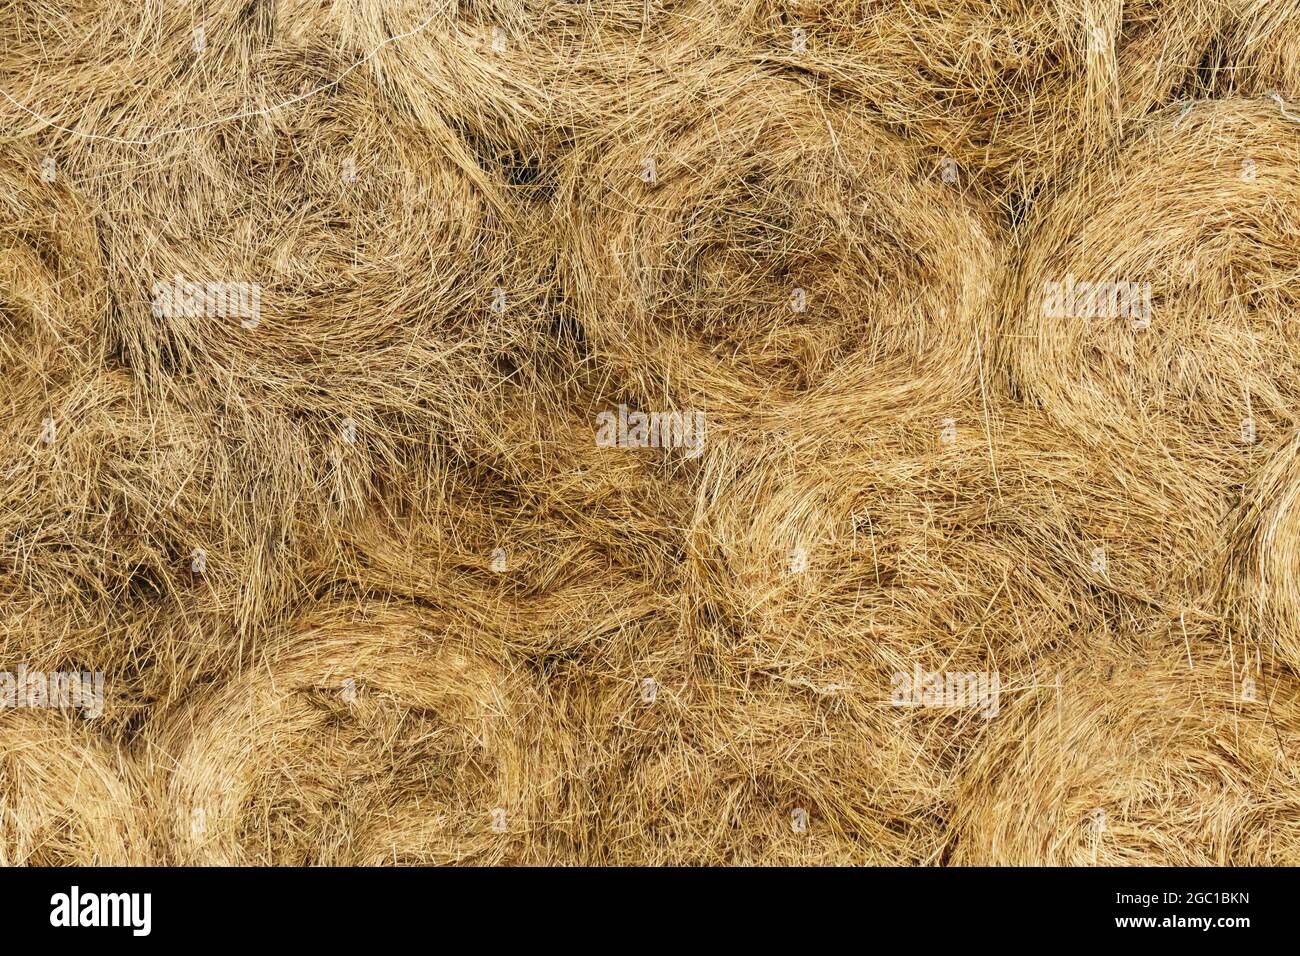 Farm theme: haystacks laying on each other Stock Photo